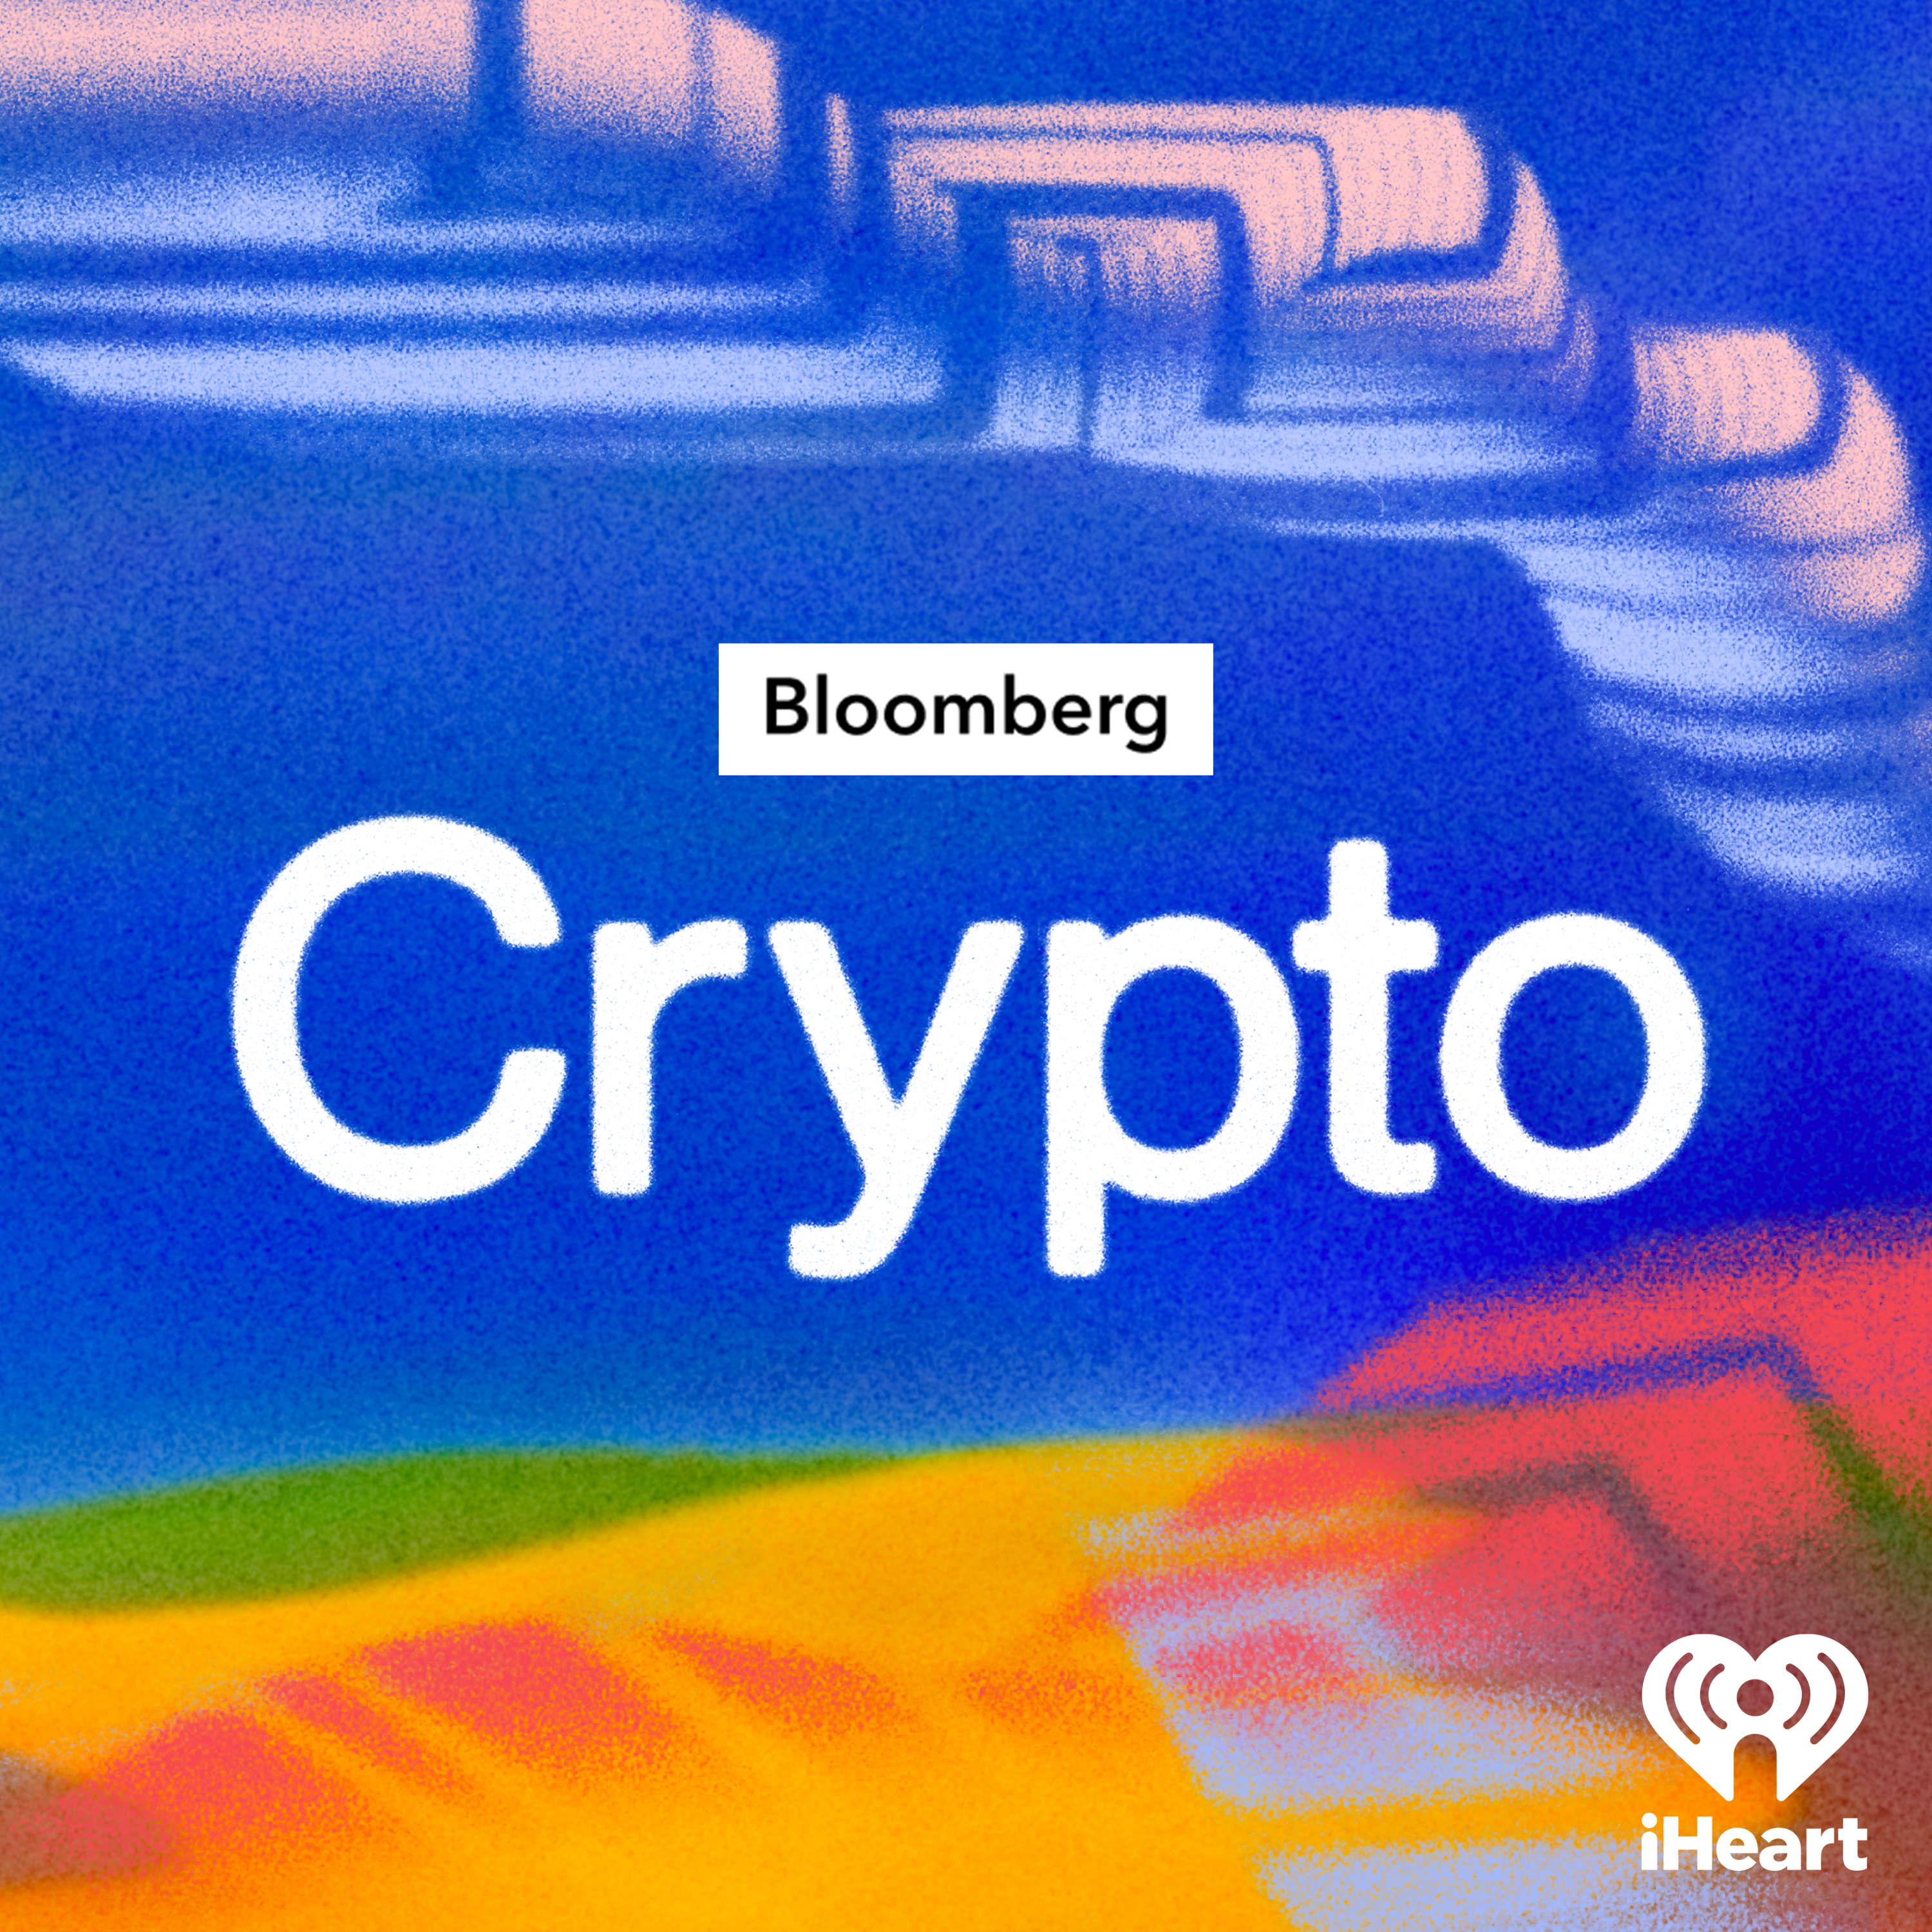 This Week in Crypto: Binance Mishandles Collateral, More Crypto Layoffs